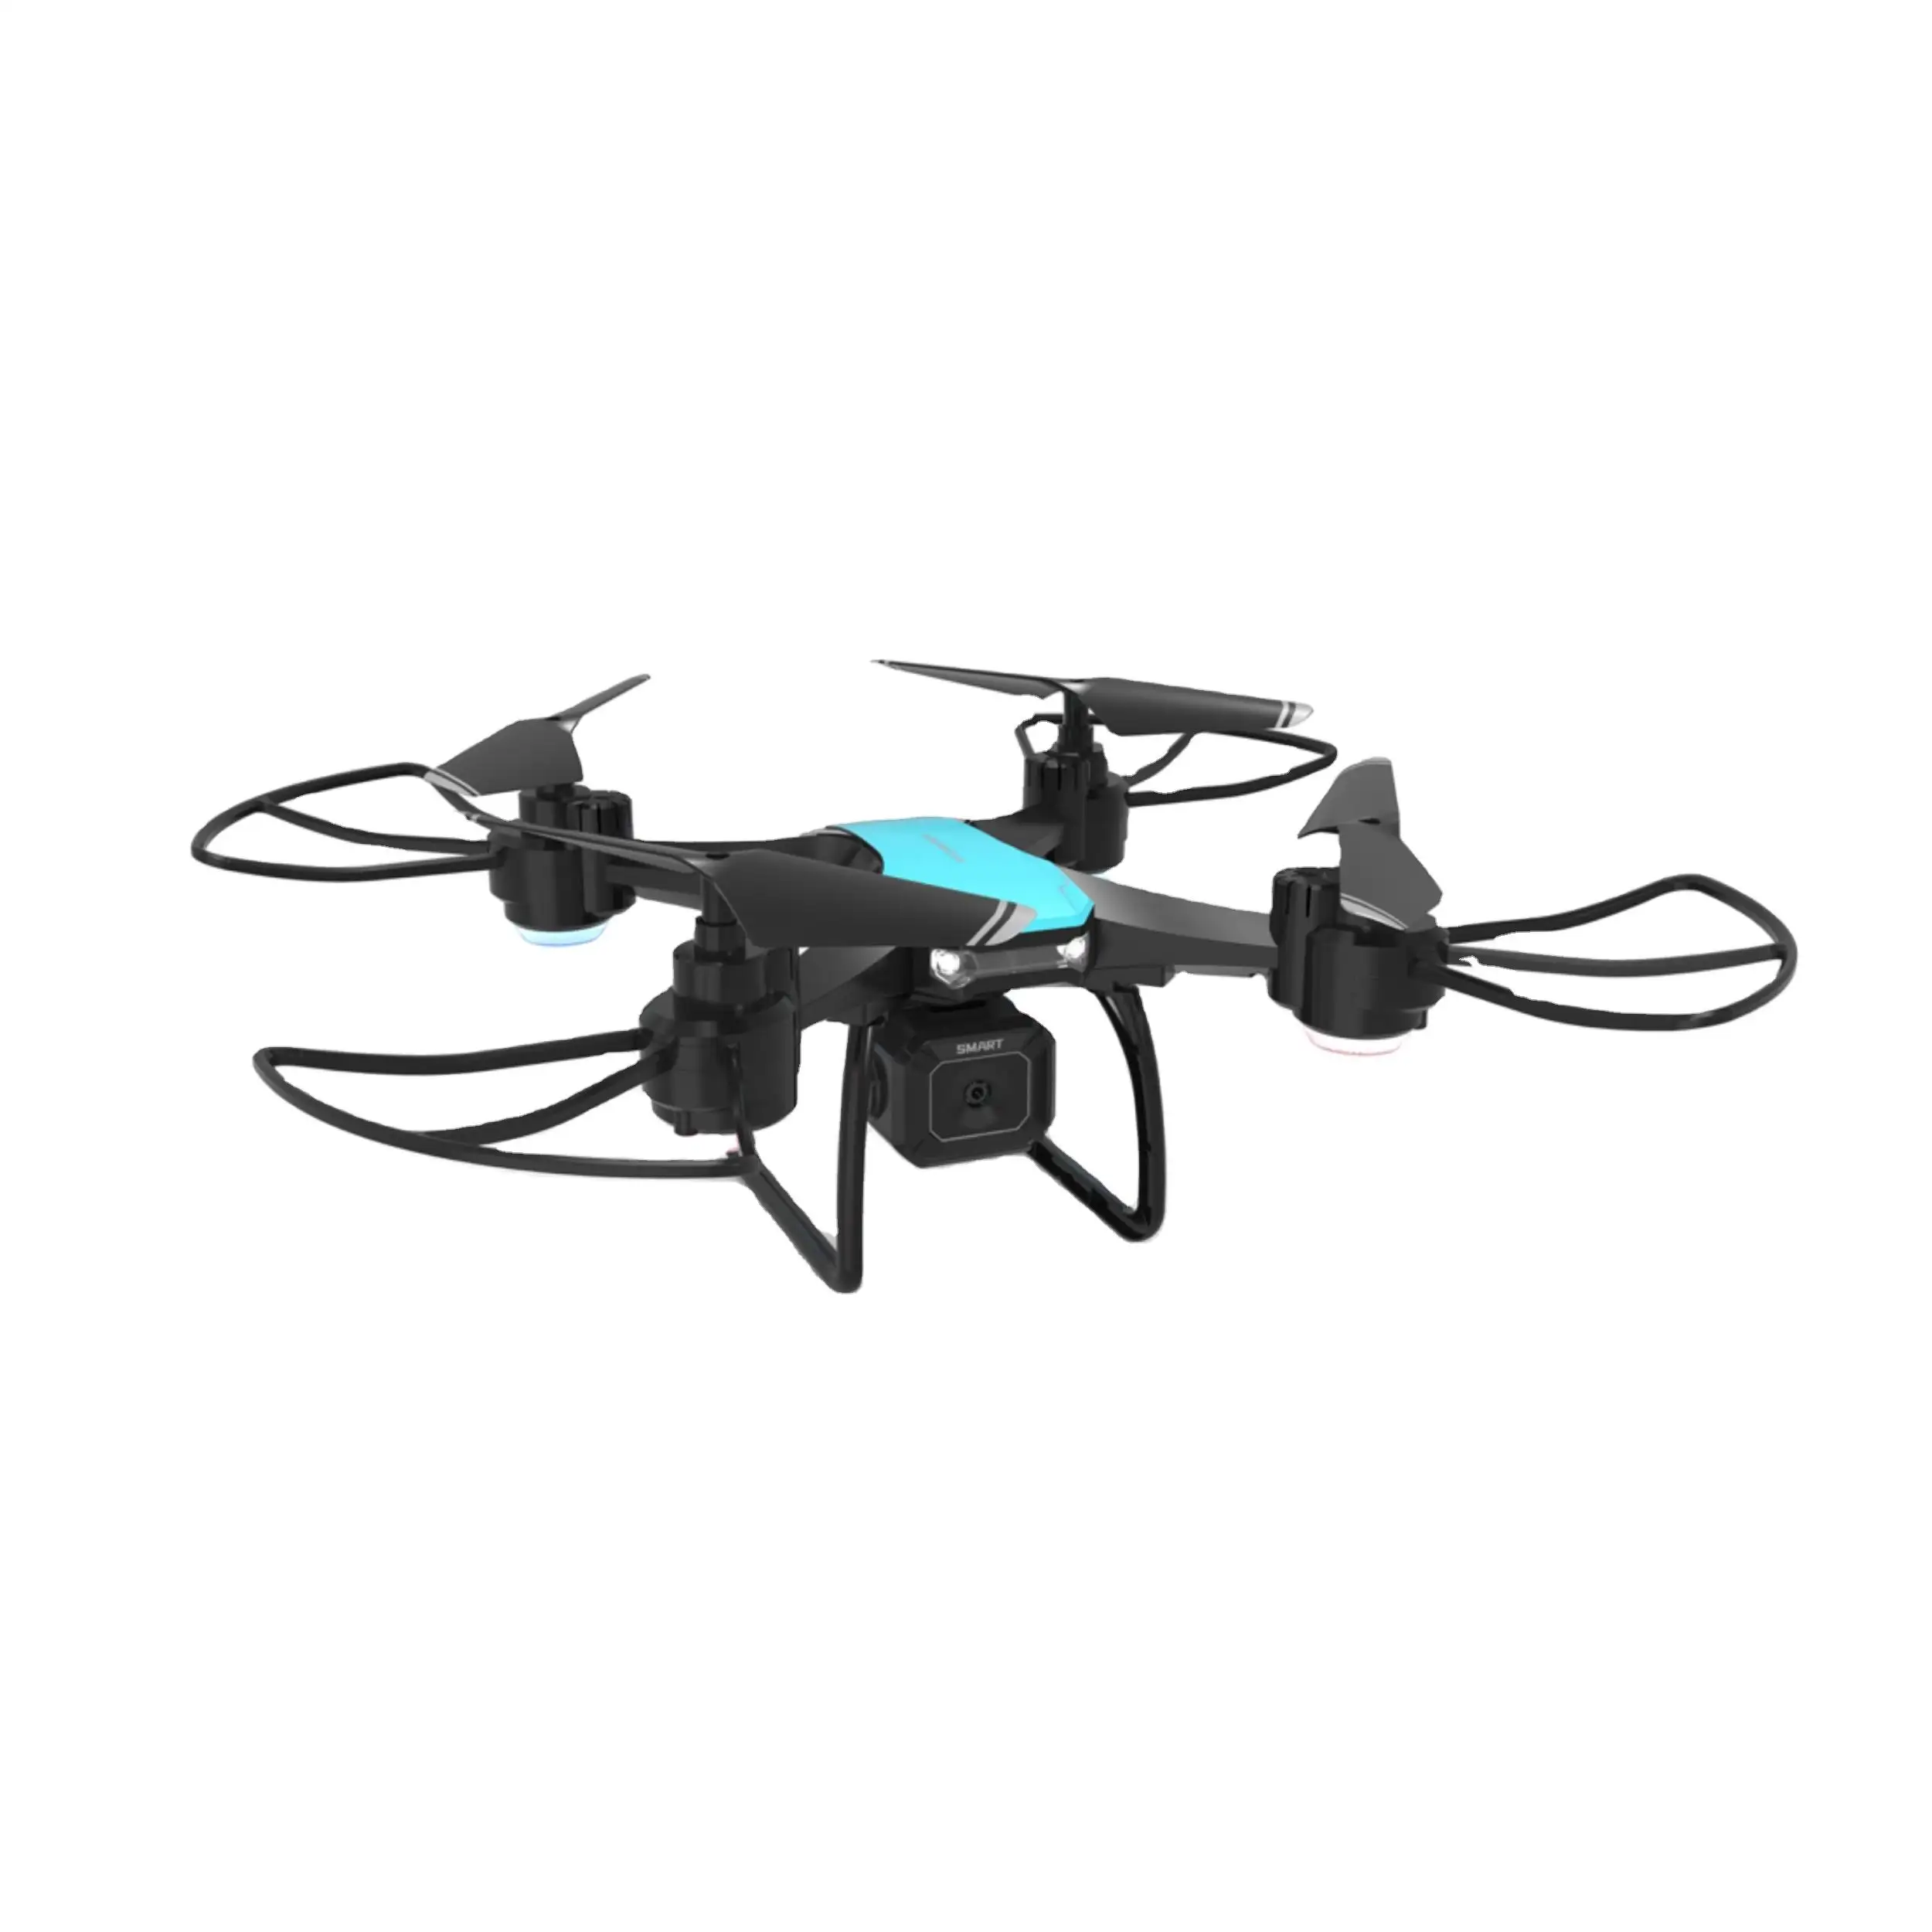 Tiktok Hot Selling JJRC H108 Scientific Intelligent Assembly 2.4G 360 Degree Headless Mode RC Drone With 4K Camera For Gifts